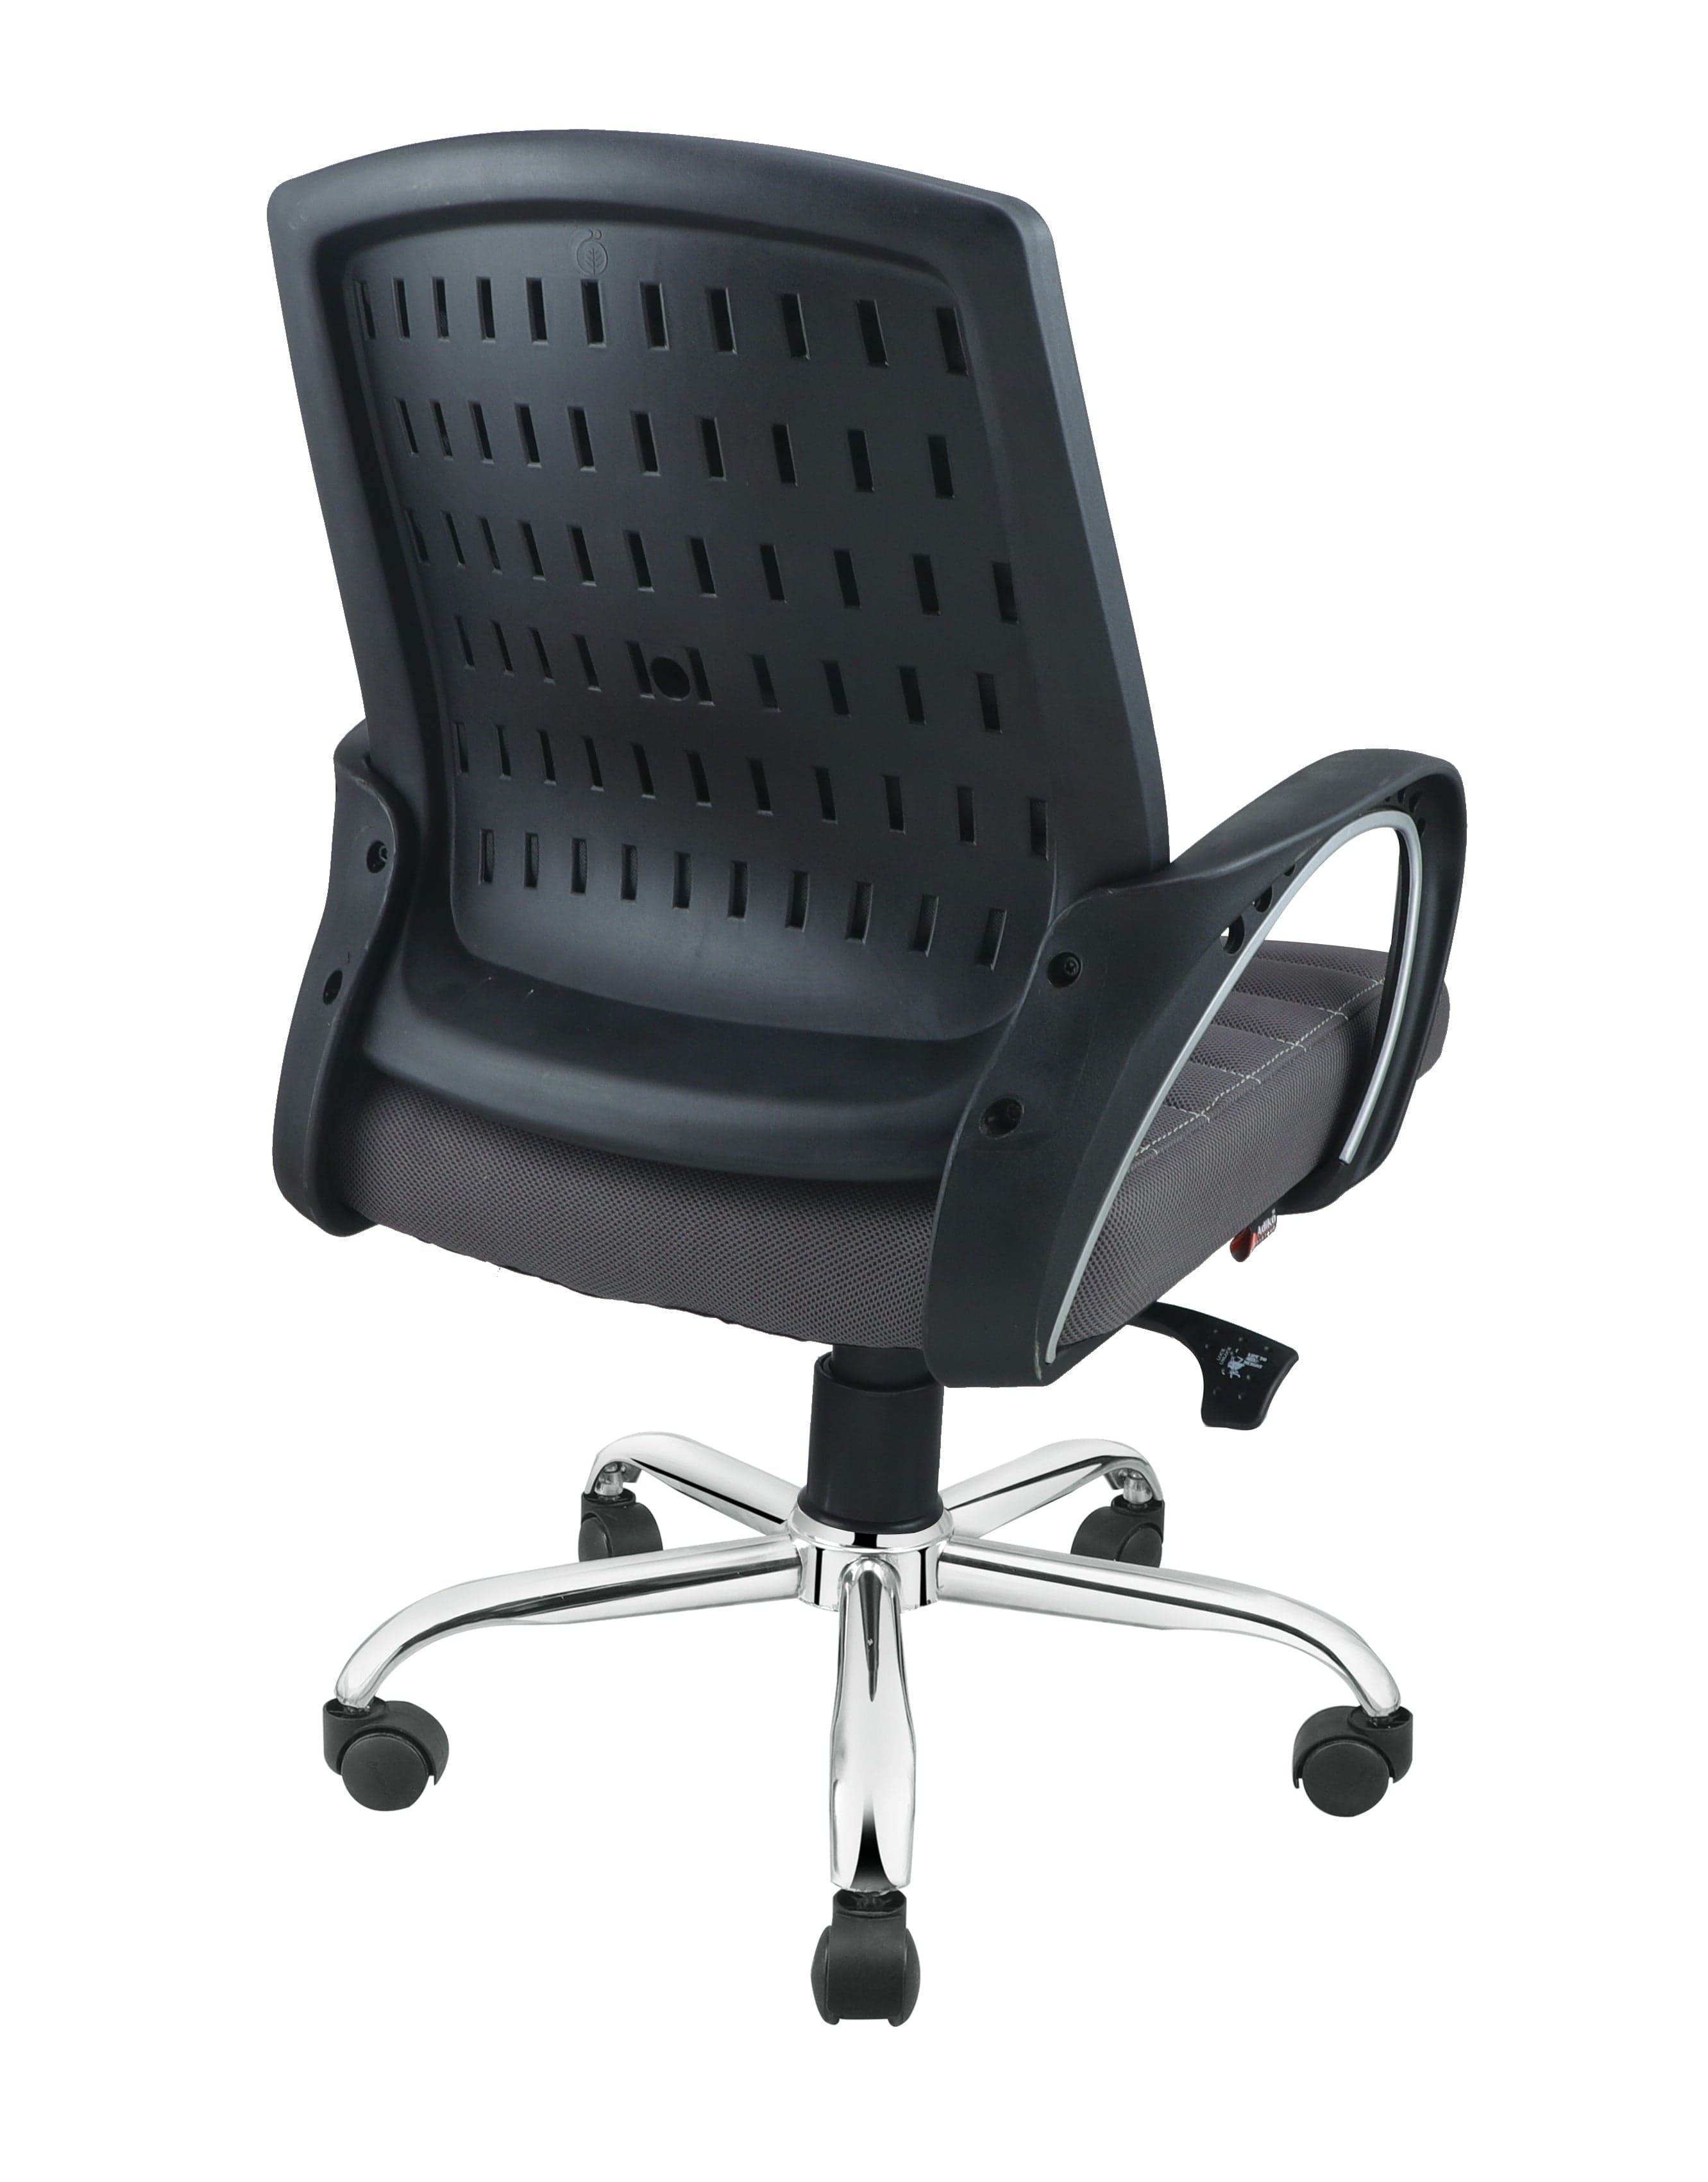 Smart Ergonomic Chair With Breathable Grey Mesh Fabric